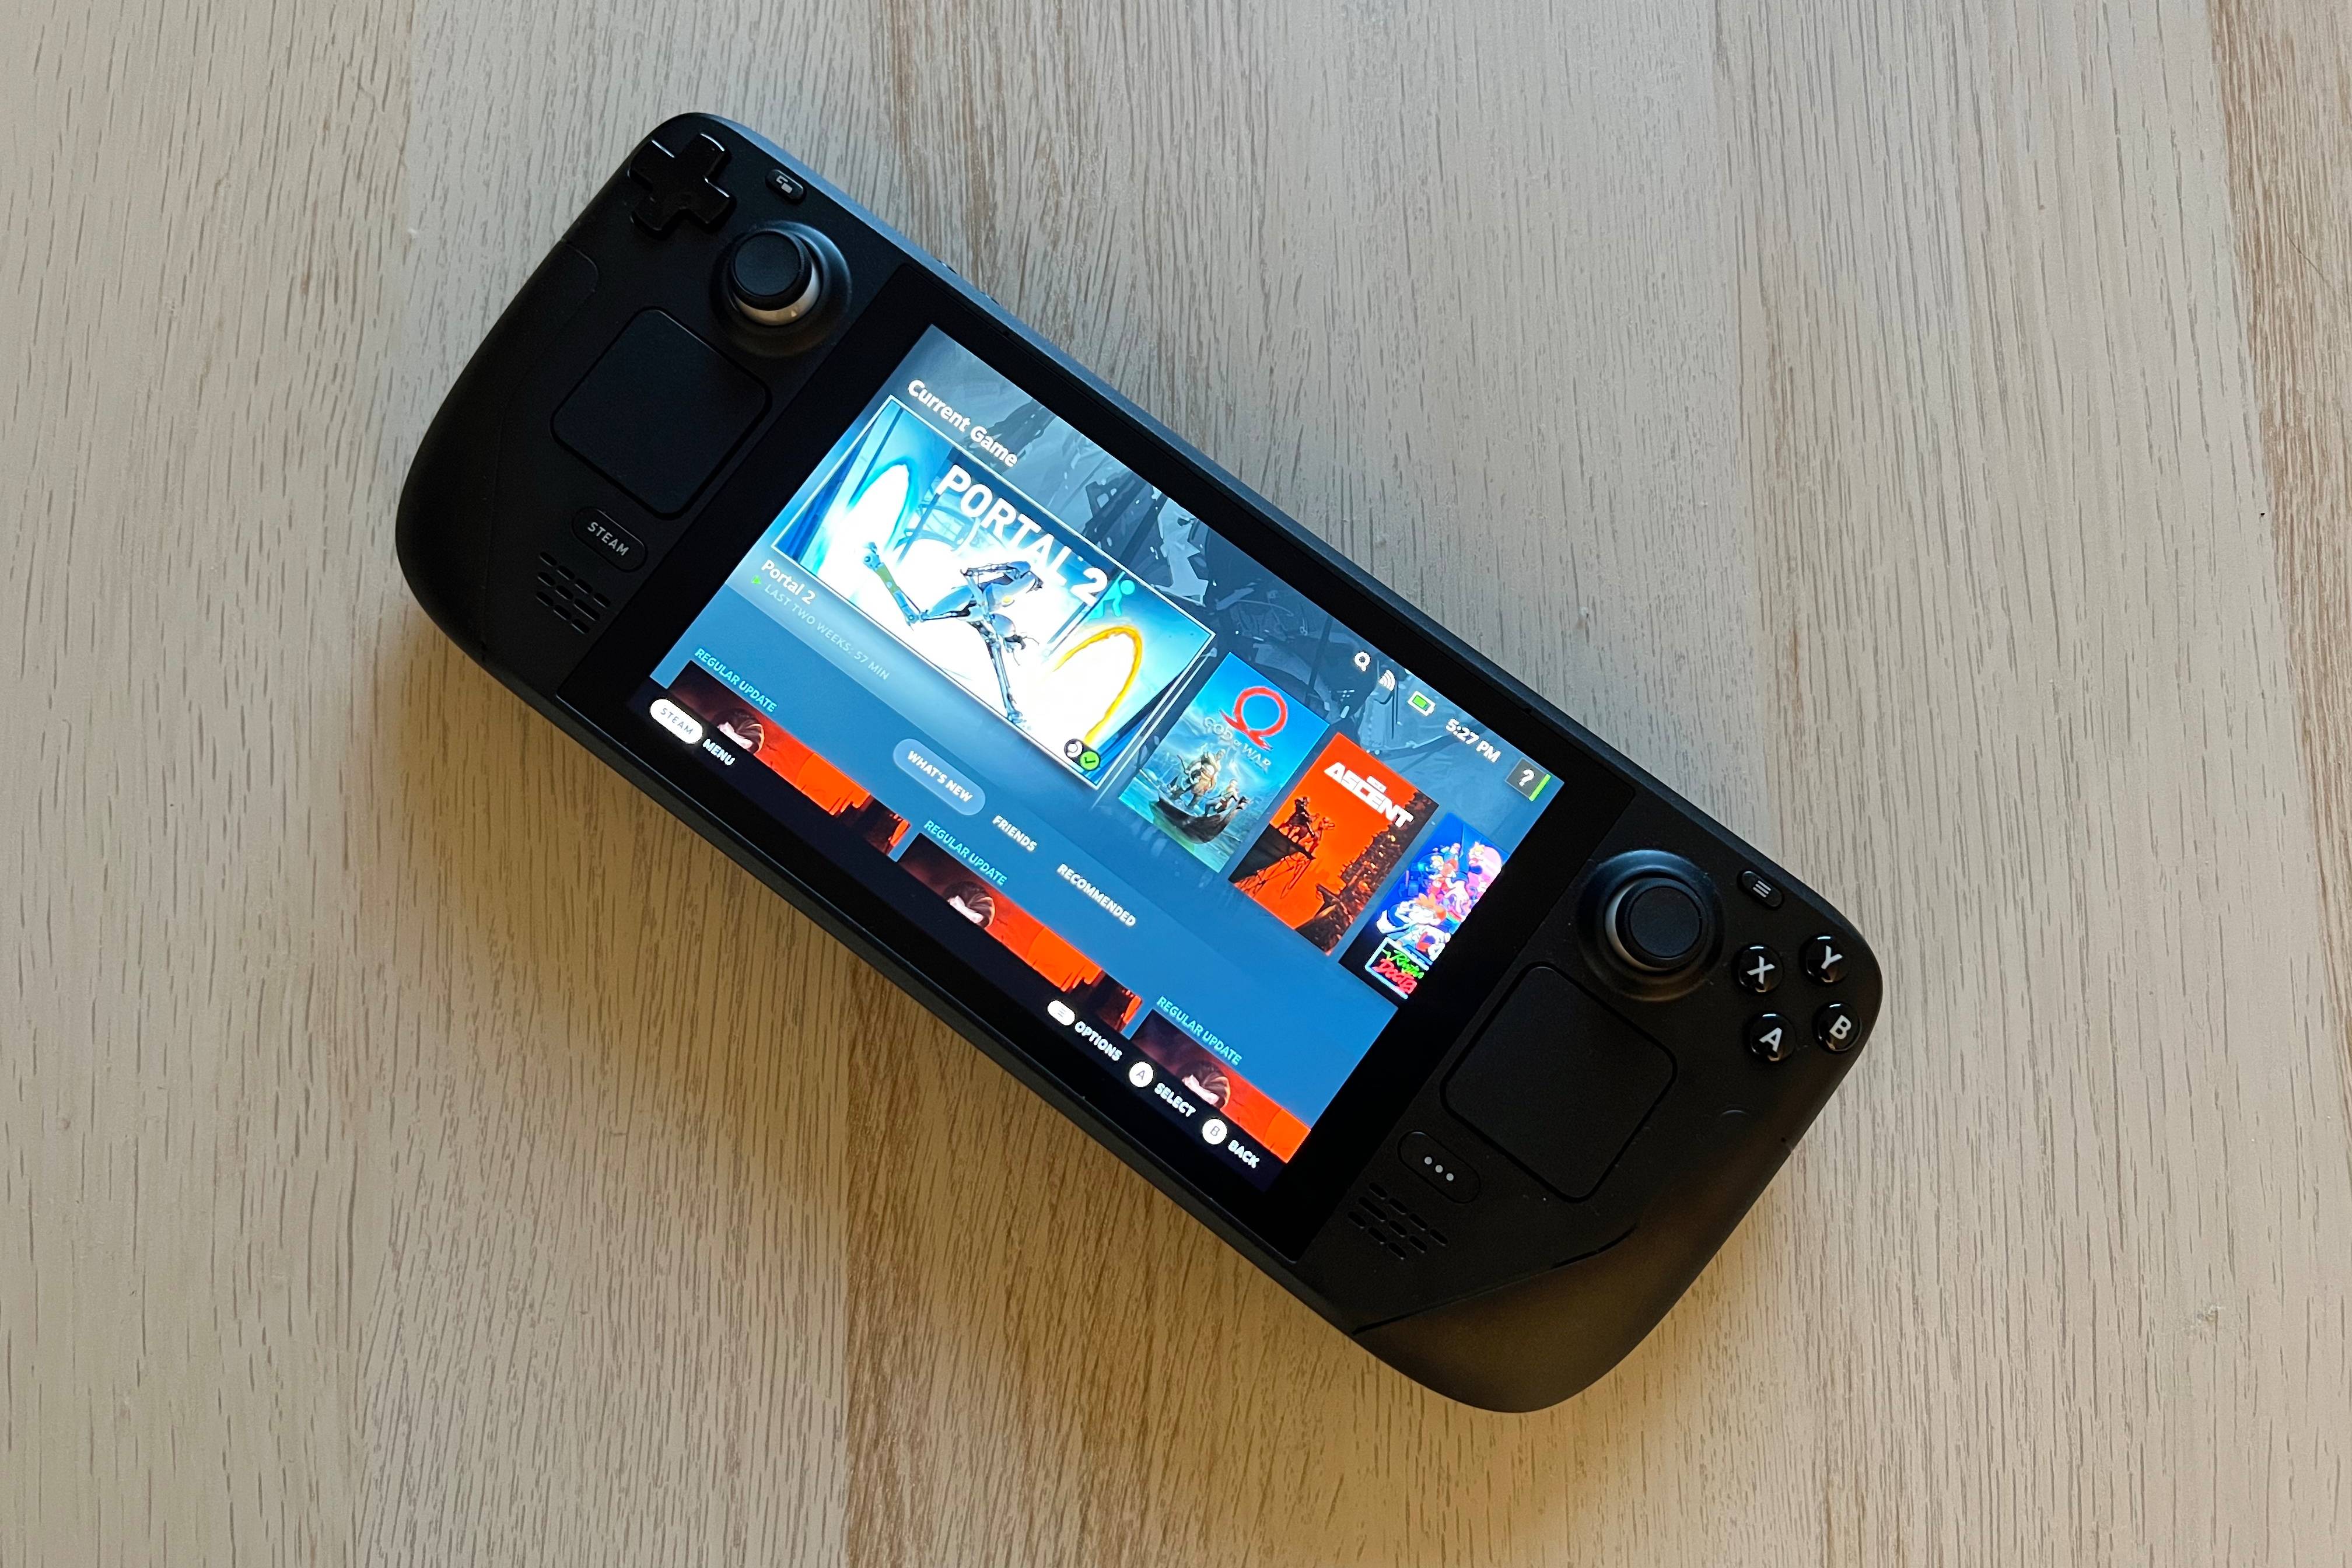 Steam official mobile gaming PC 'Steam Deck' setup version, UI